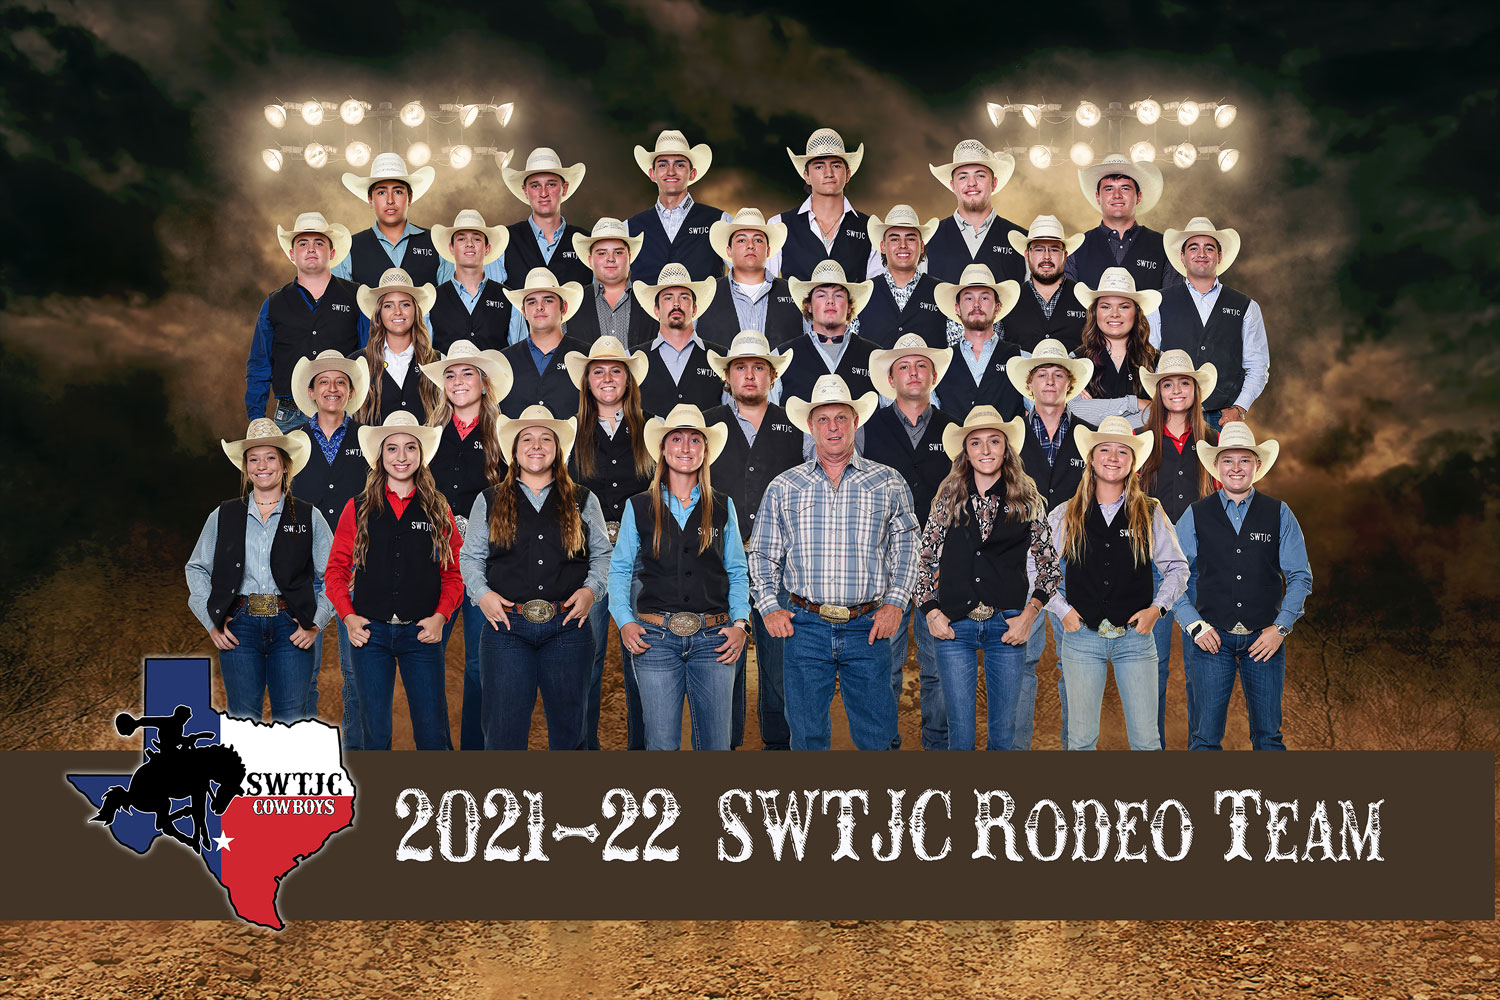 2021 - 2022 SWTJC Rodeo Team